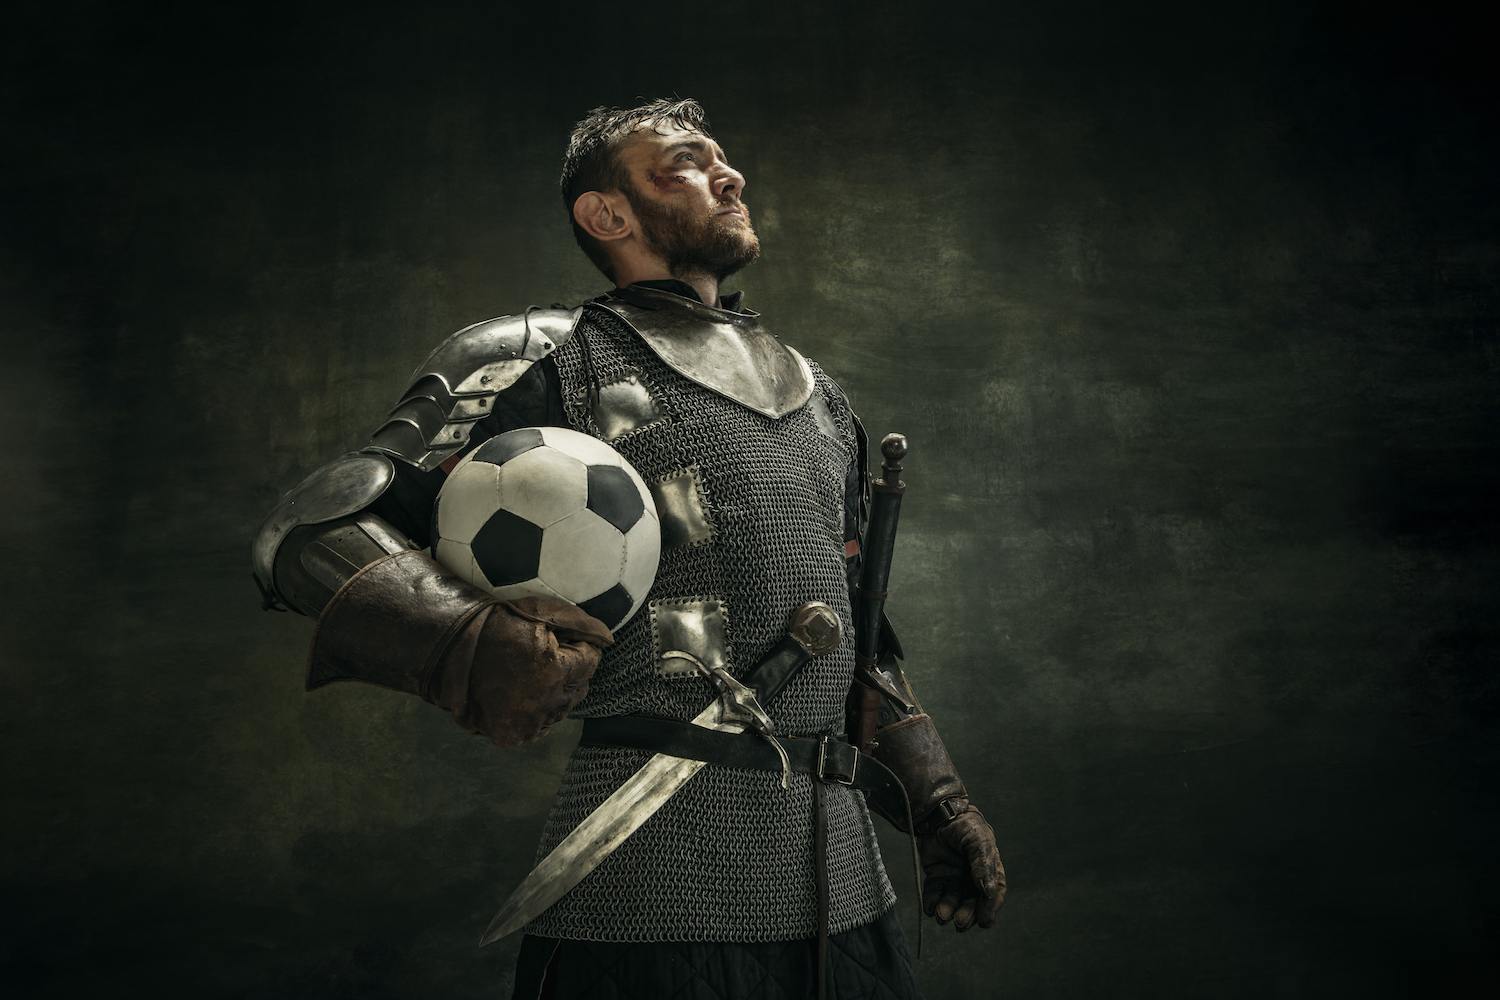 A man dressed as a knight holding a football